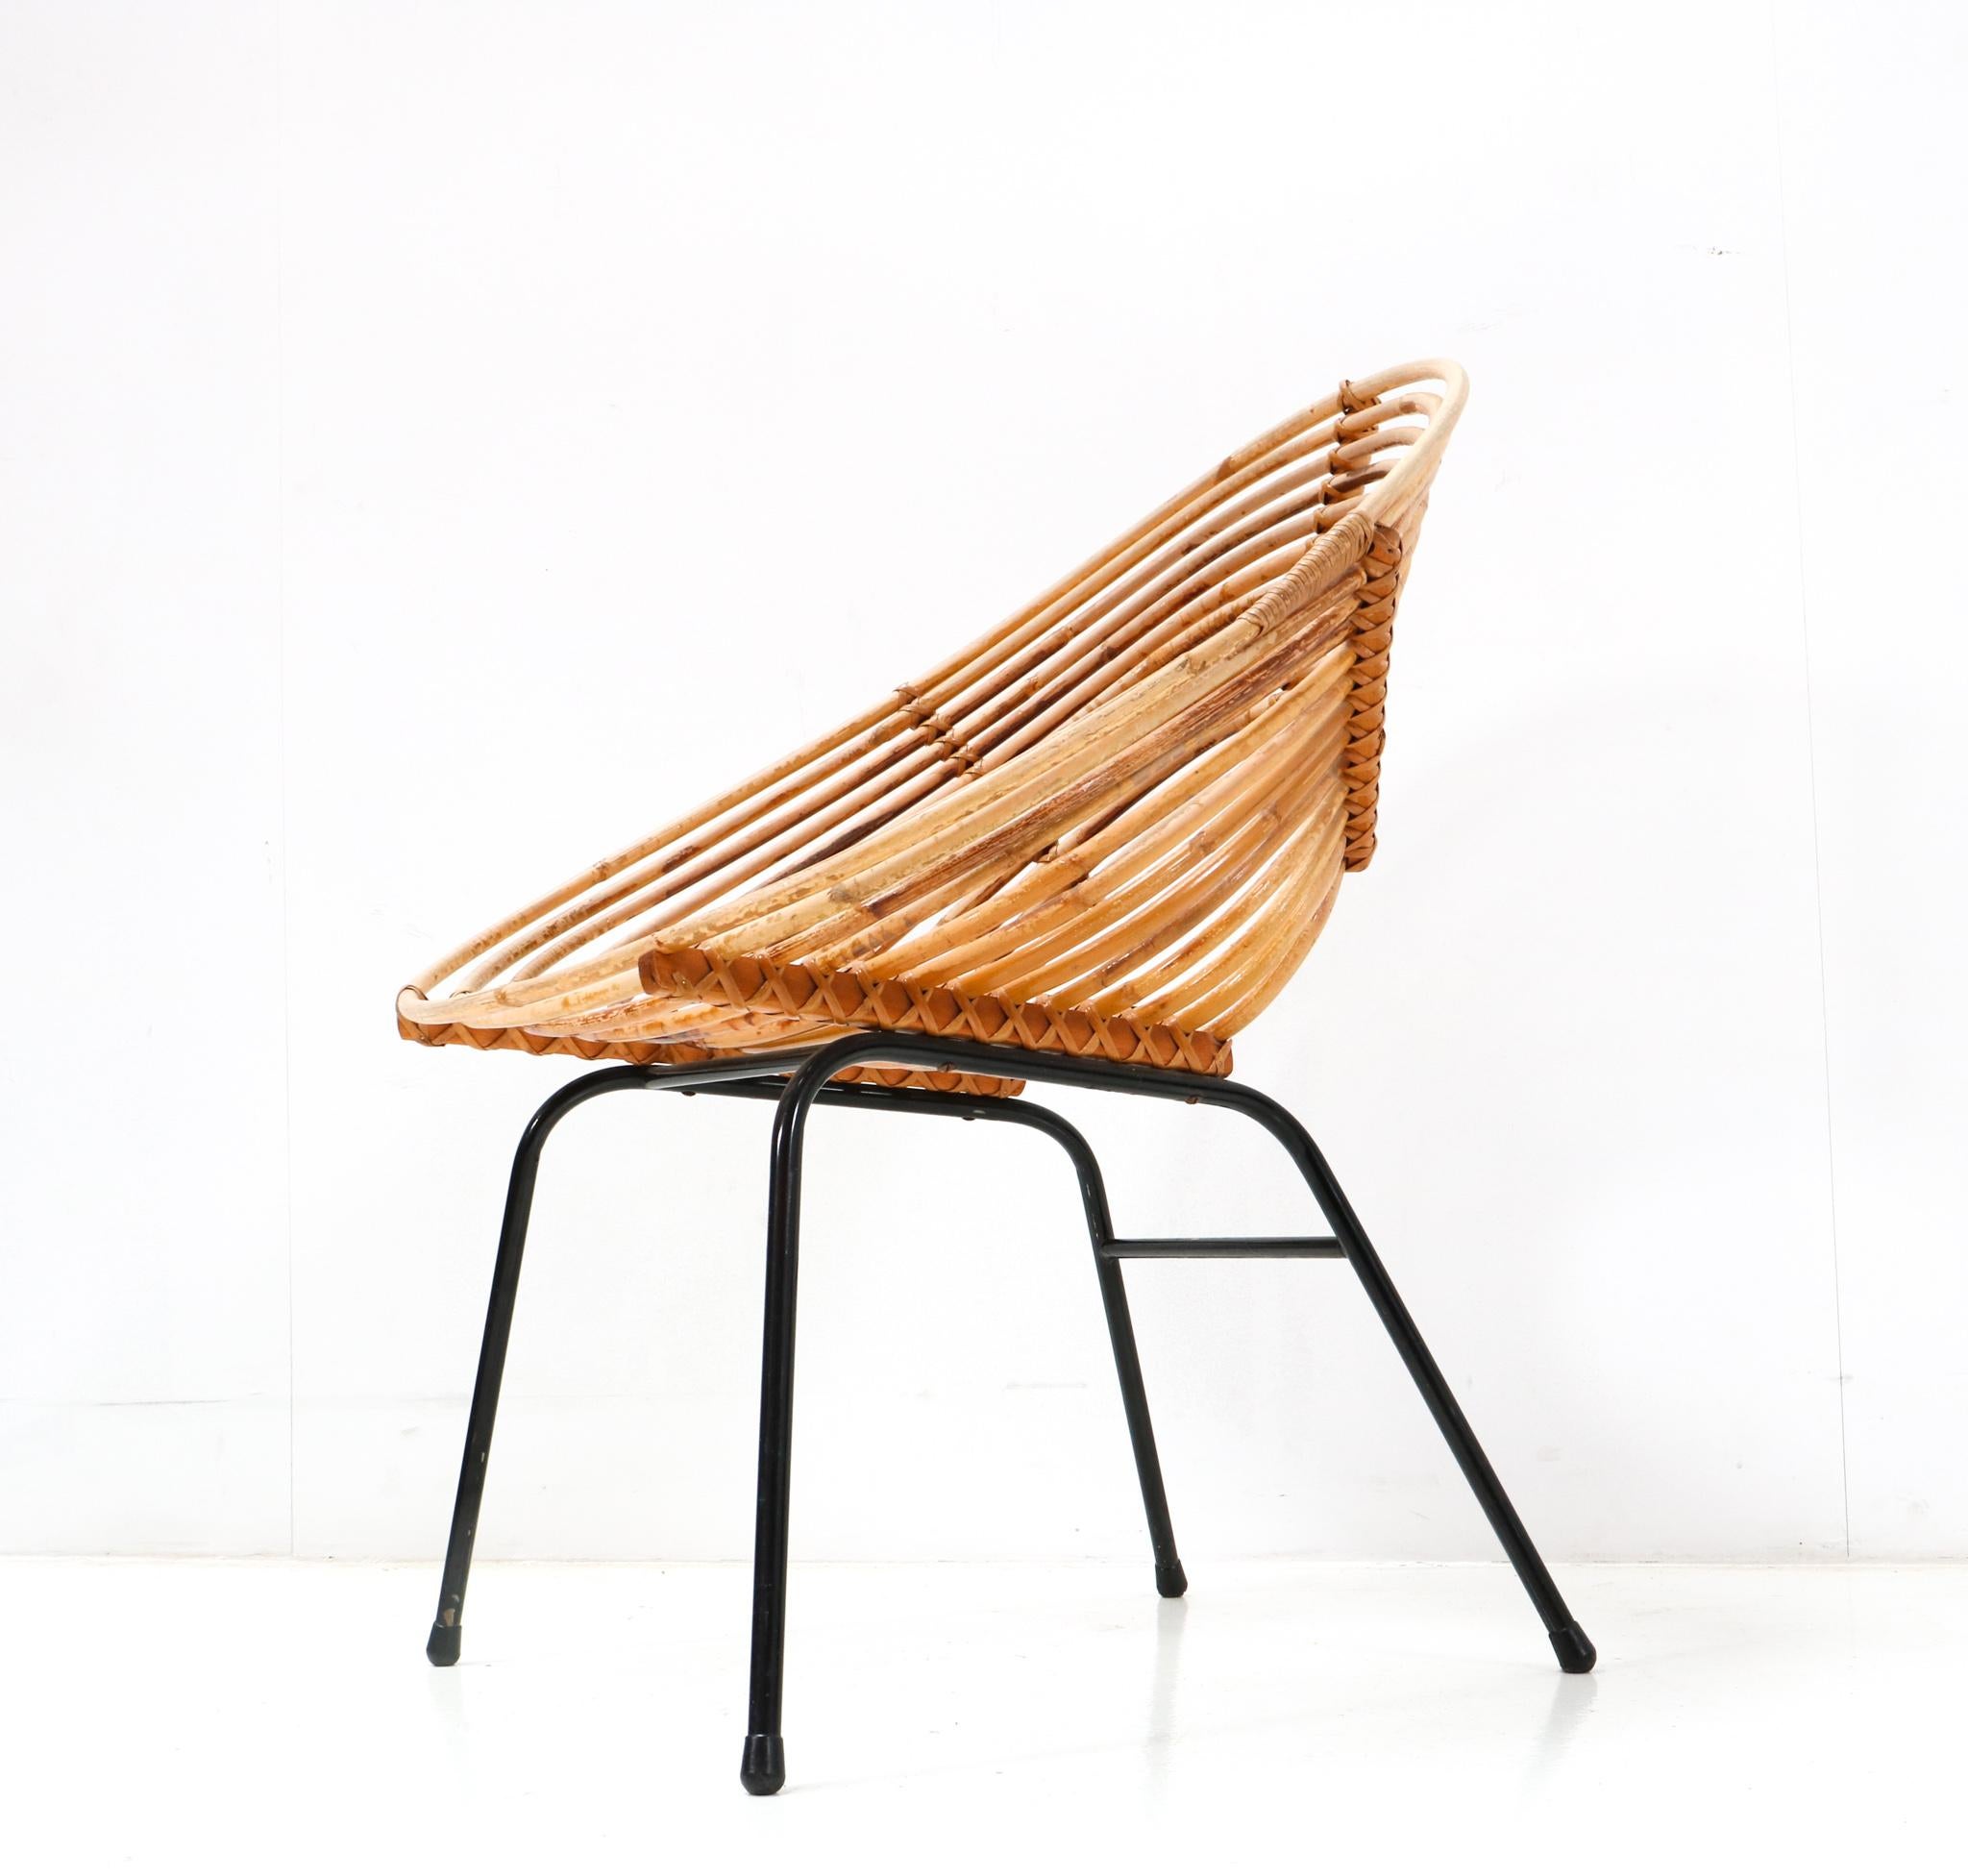 Mid-20th Century Rattan Mid-Century Modern Lounge Chair by Dirk van Sliedregt for Rohe, 1950s For Sale